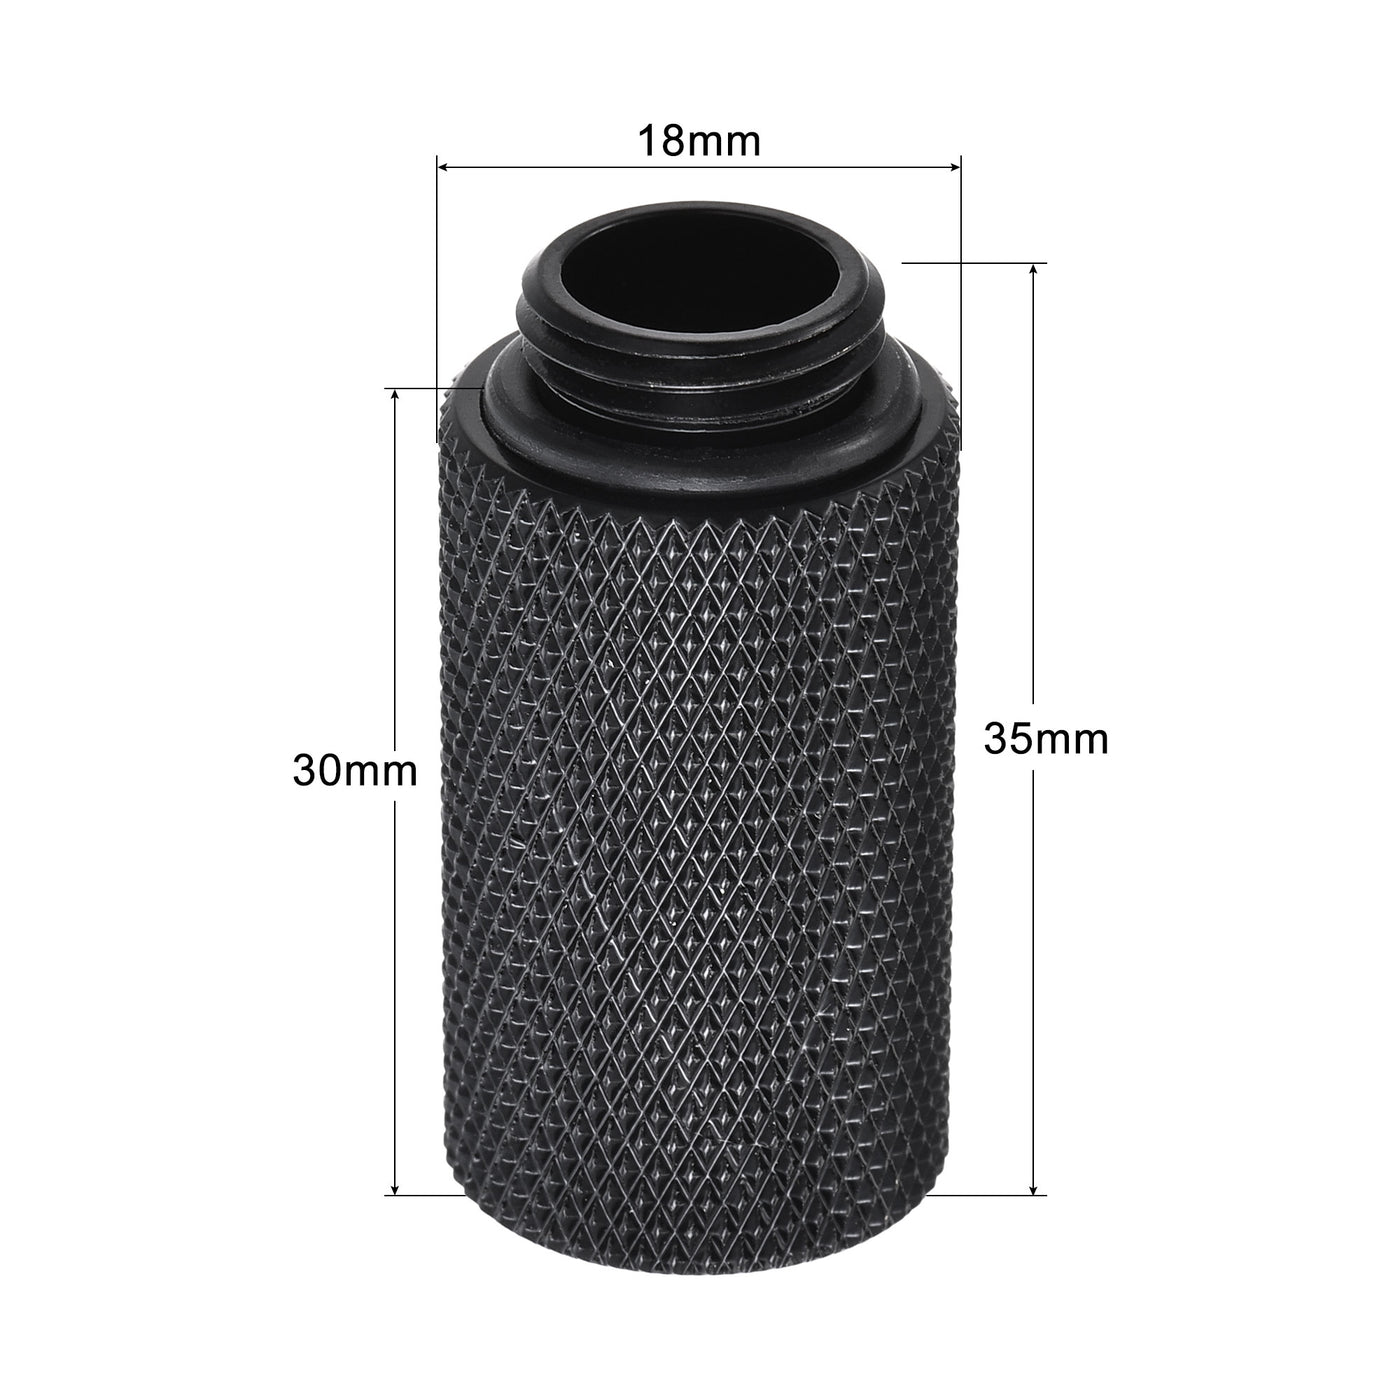 uxcell Uxcell Male to Female Extender Fitting G1/4 x 30mm for Water Cooling System Black 4pcs